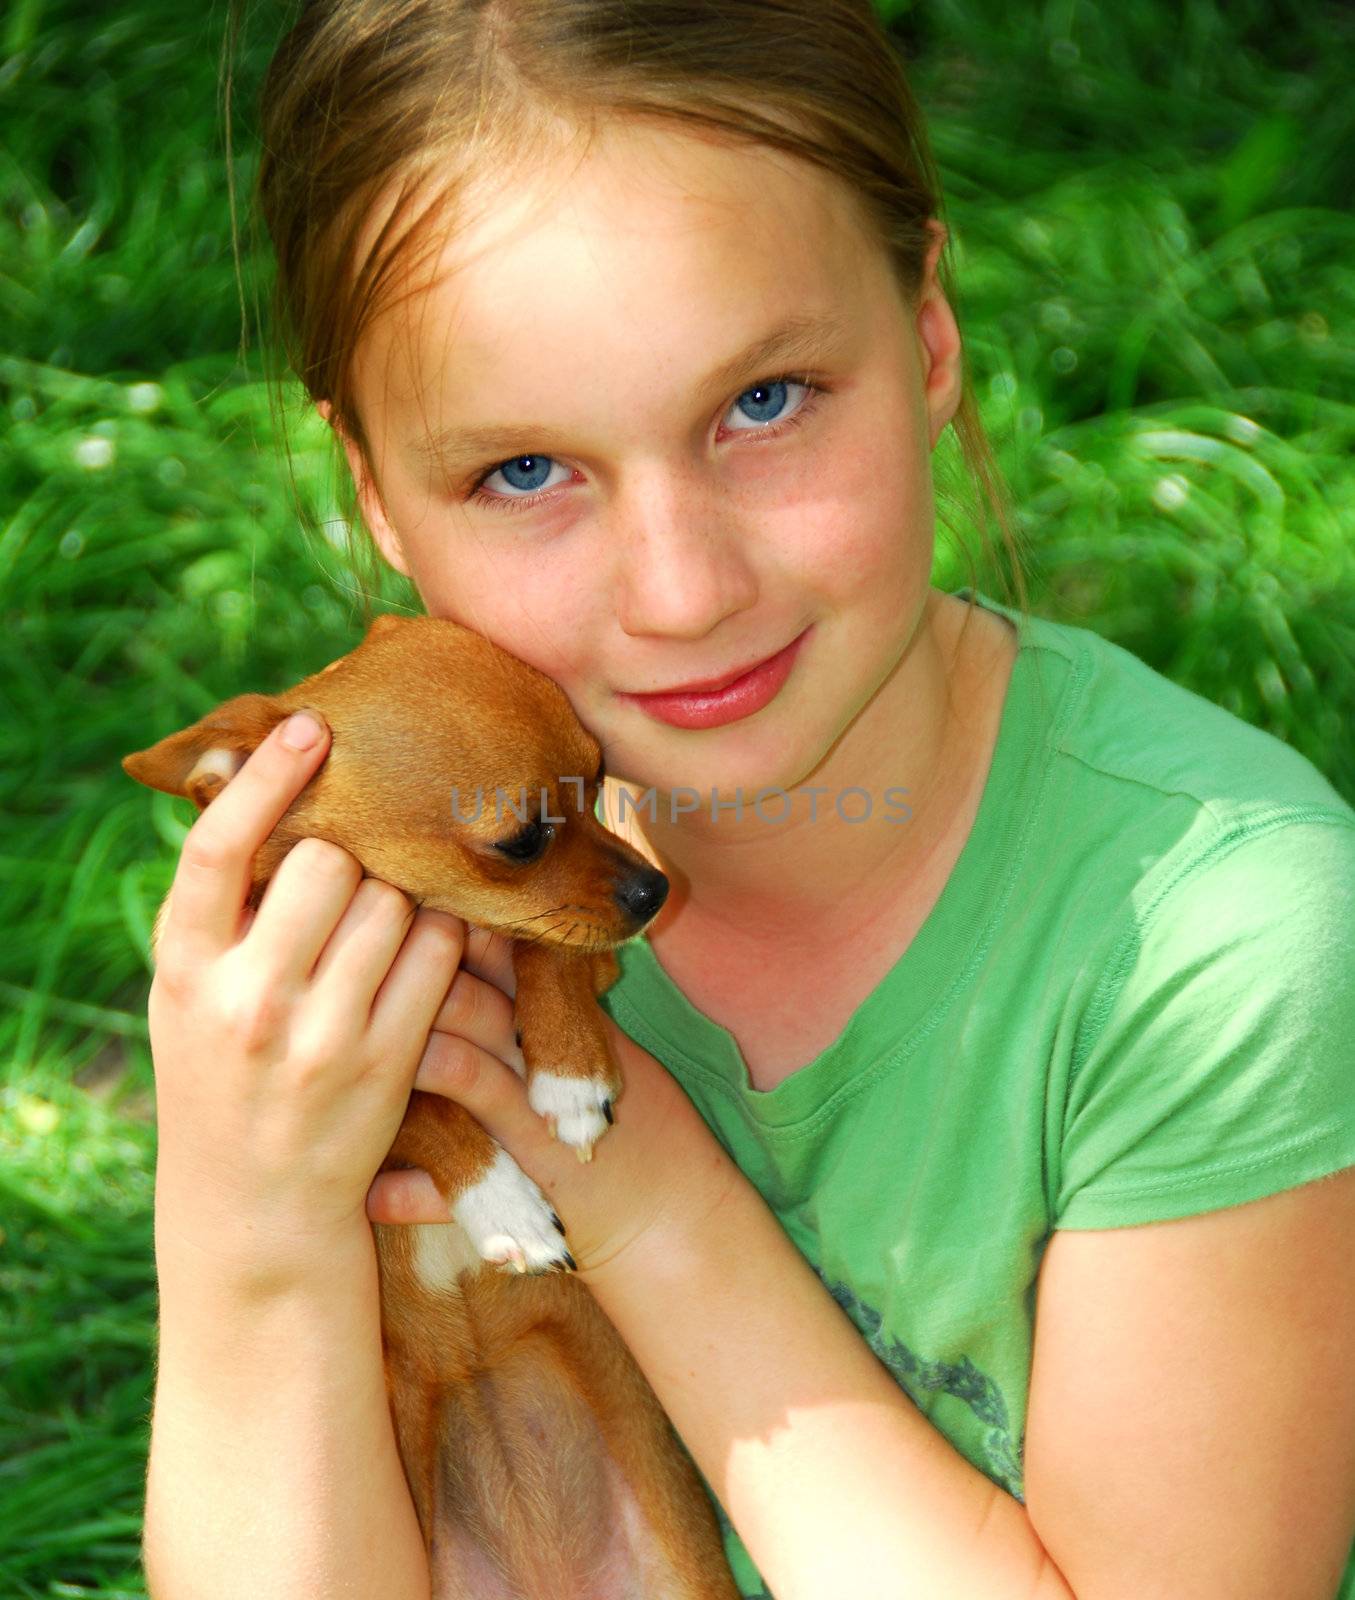 Smiling young girl holding a chihuahua puppy